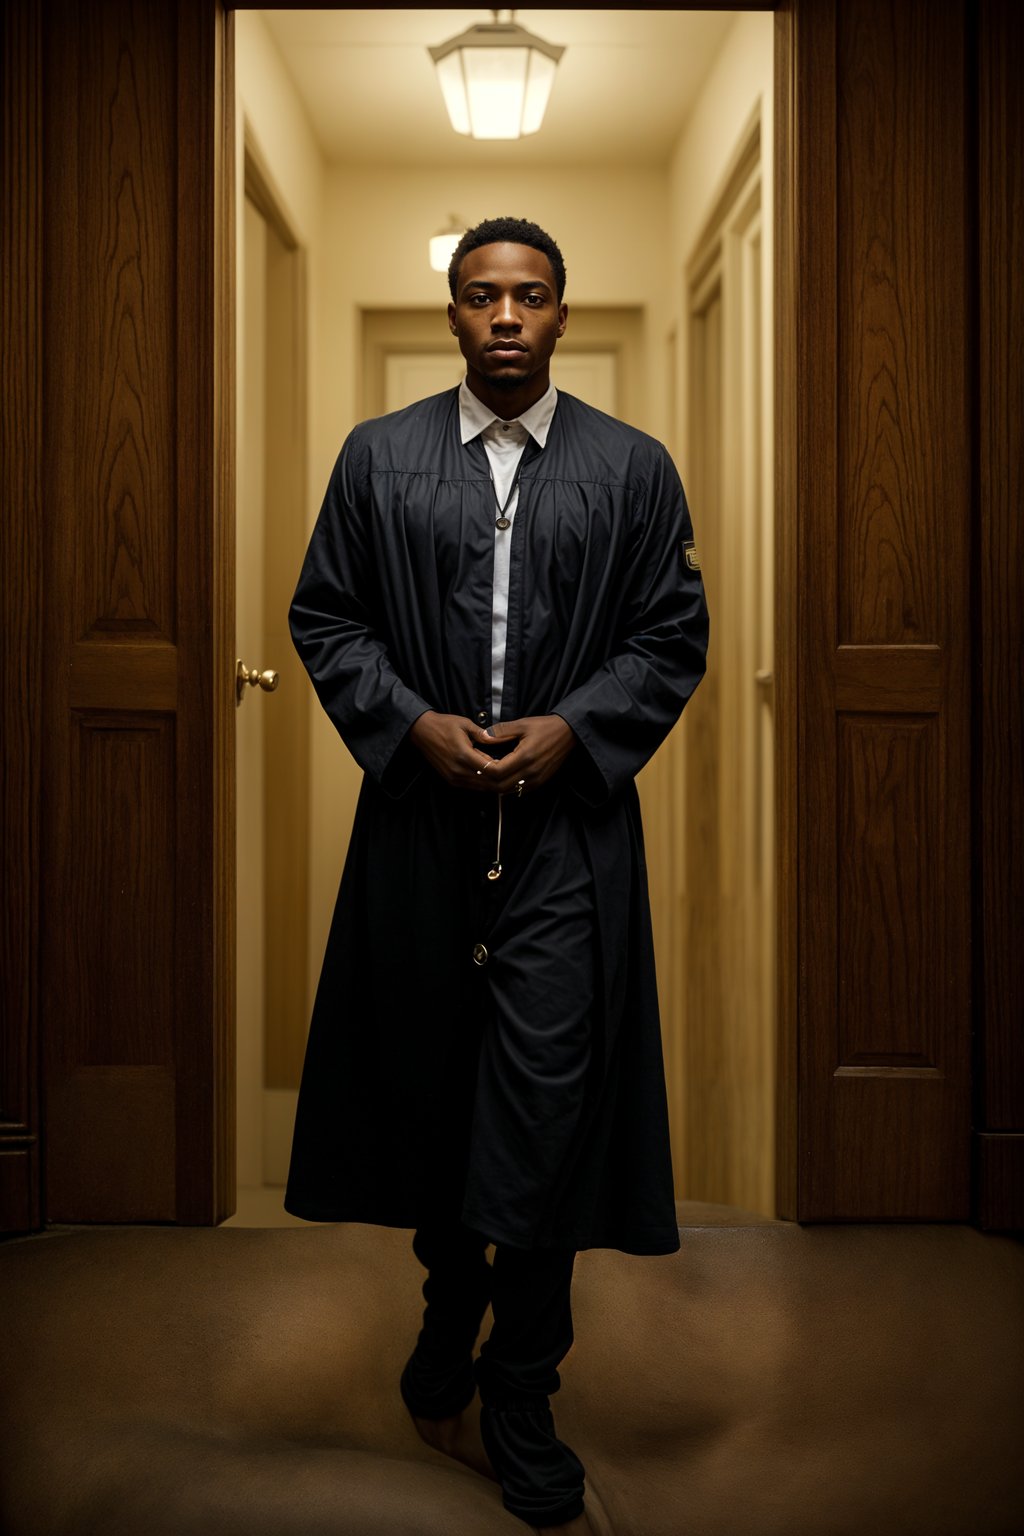 a graduate man in their academic gown, holding a key or a keychain, representing the doors of opportunities opening up after graduation